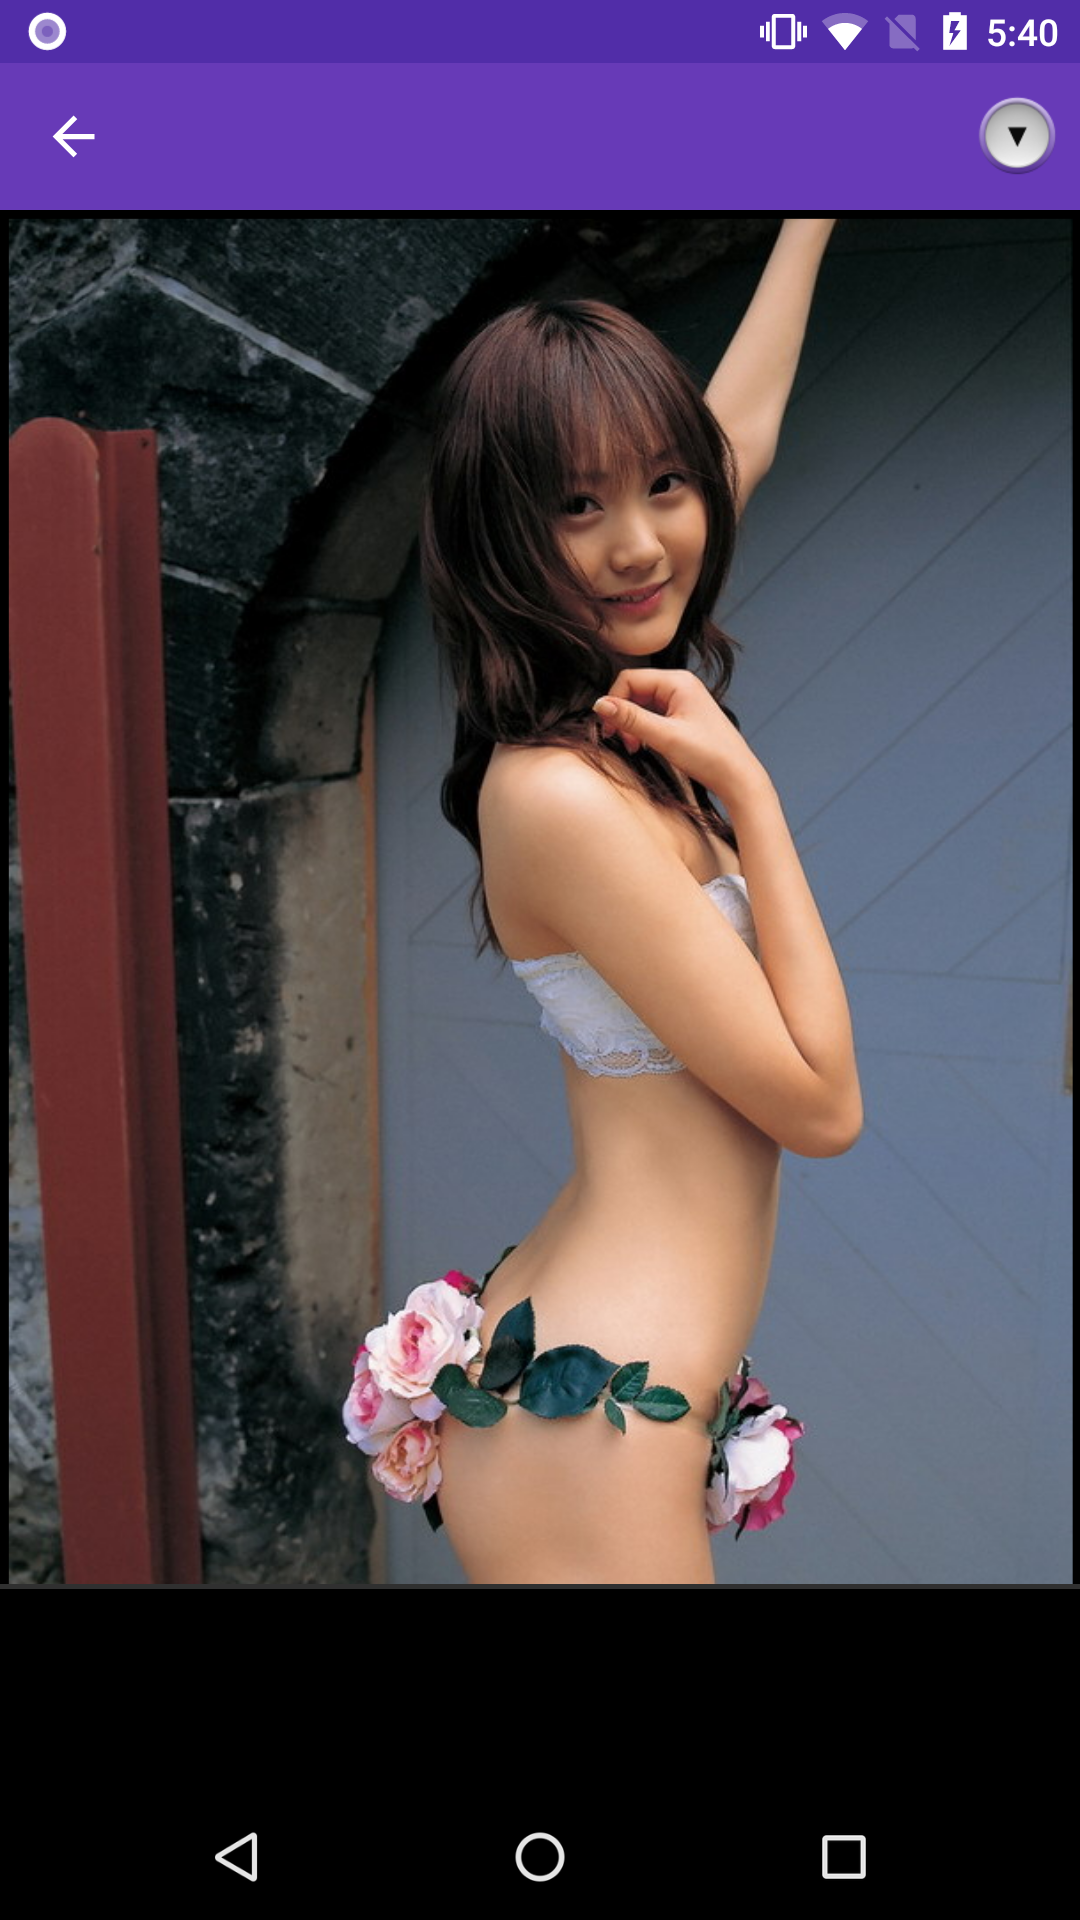 Sexy Asian Girls japan,hentie,korean,photos,pornstar,anime,apps,girls,apk,china,gallery,asian,hentai,picture,sexy,galleries,images,image,app,amateur,porn,free,pics,pic